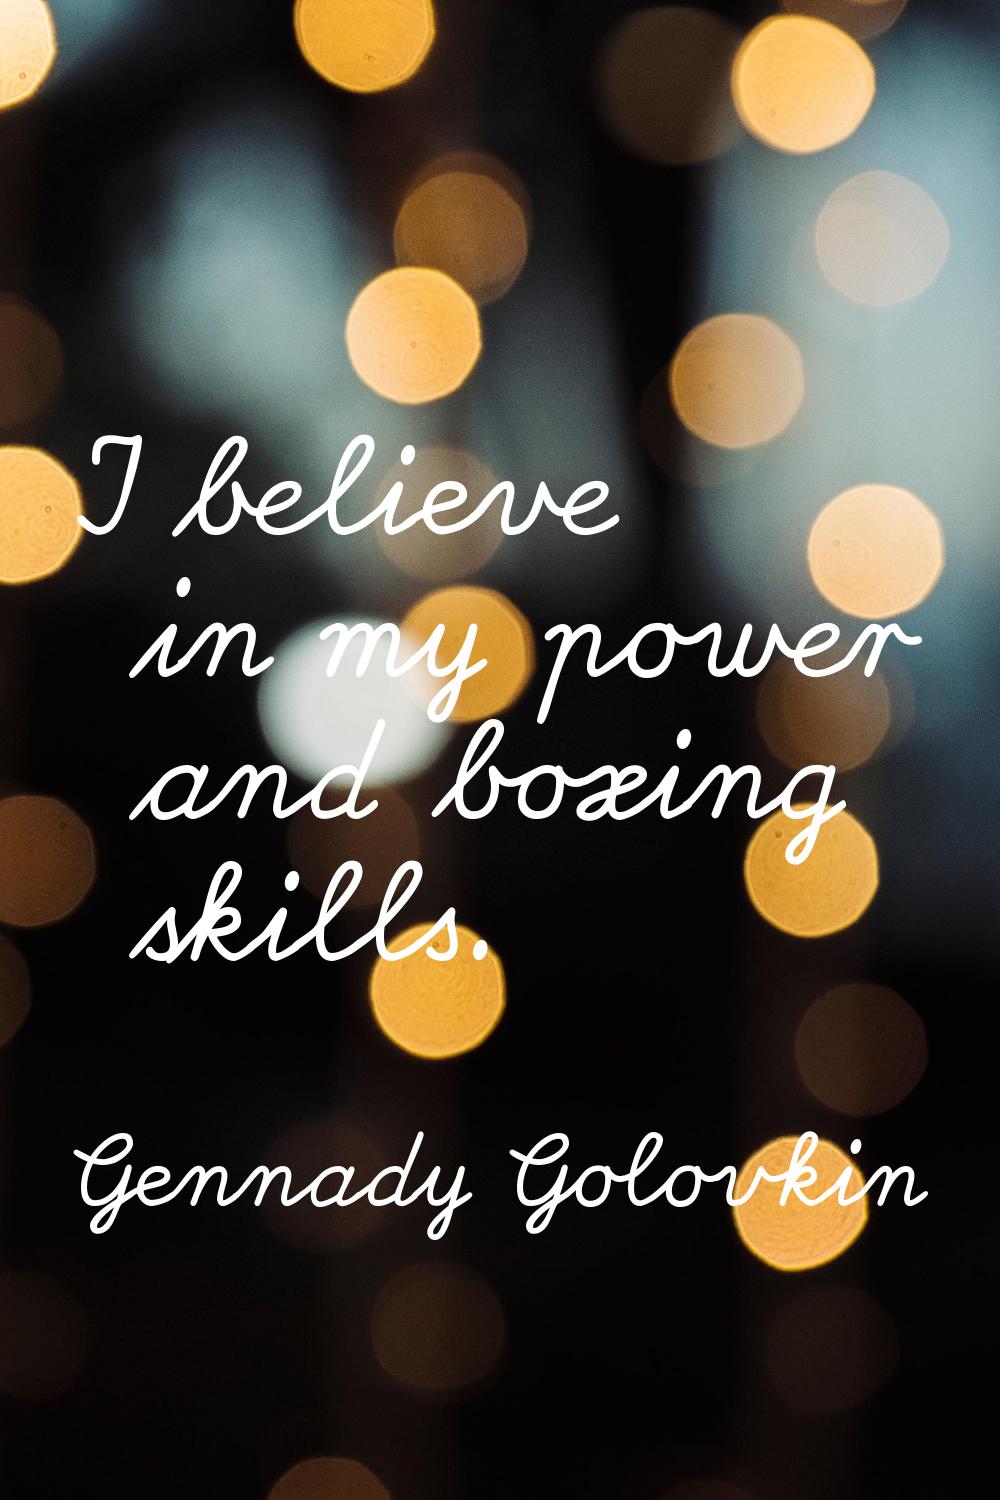 I believe in my power and boxing skills.